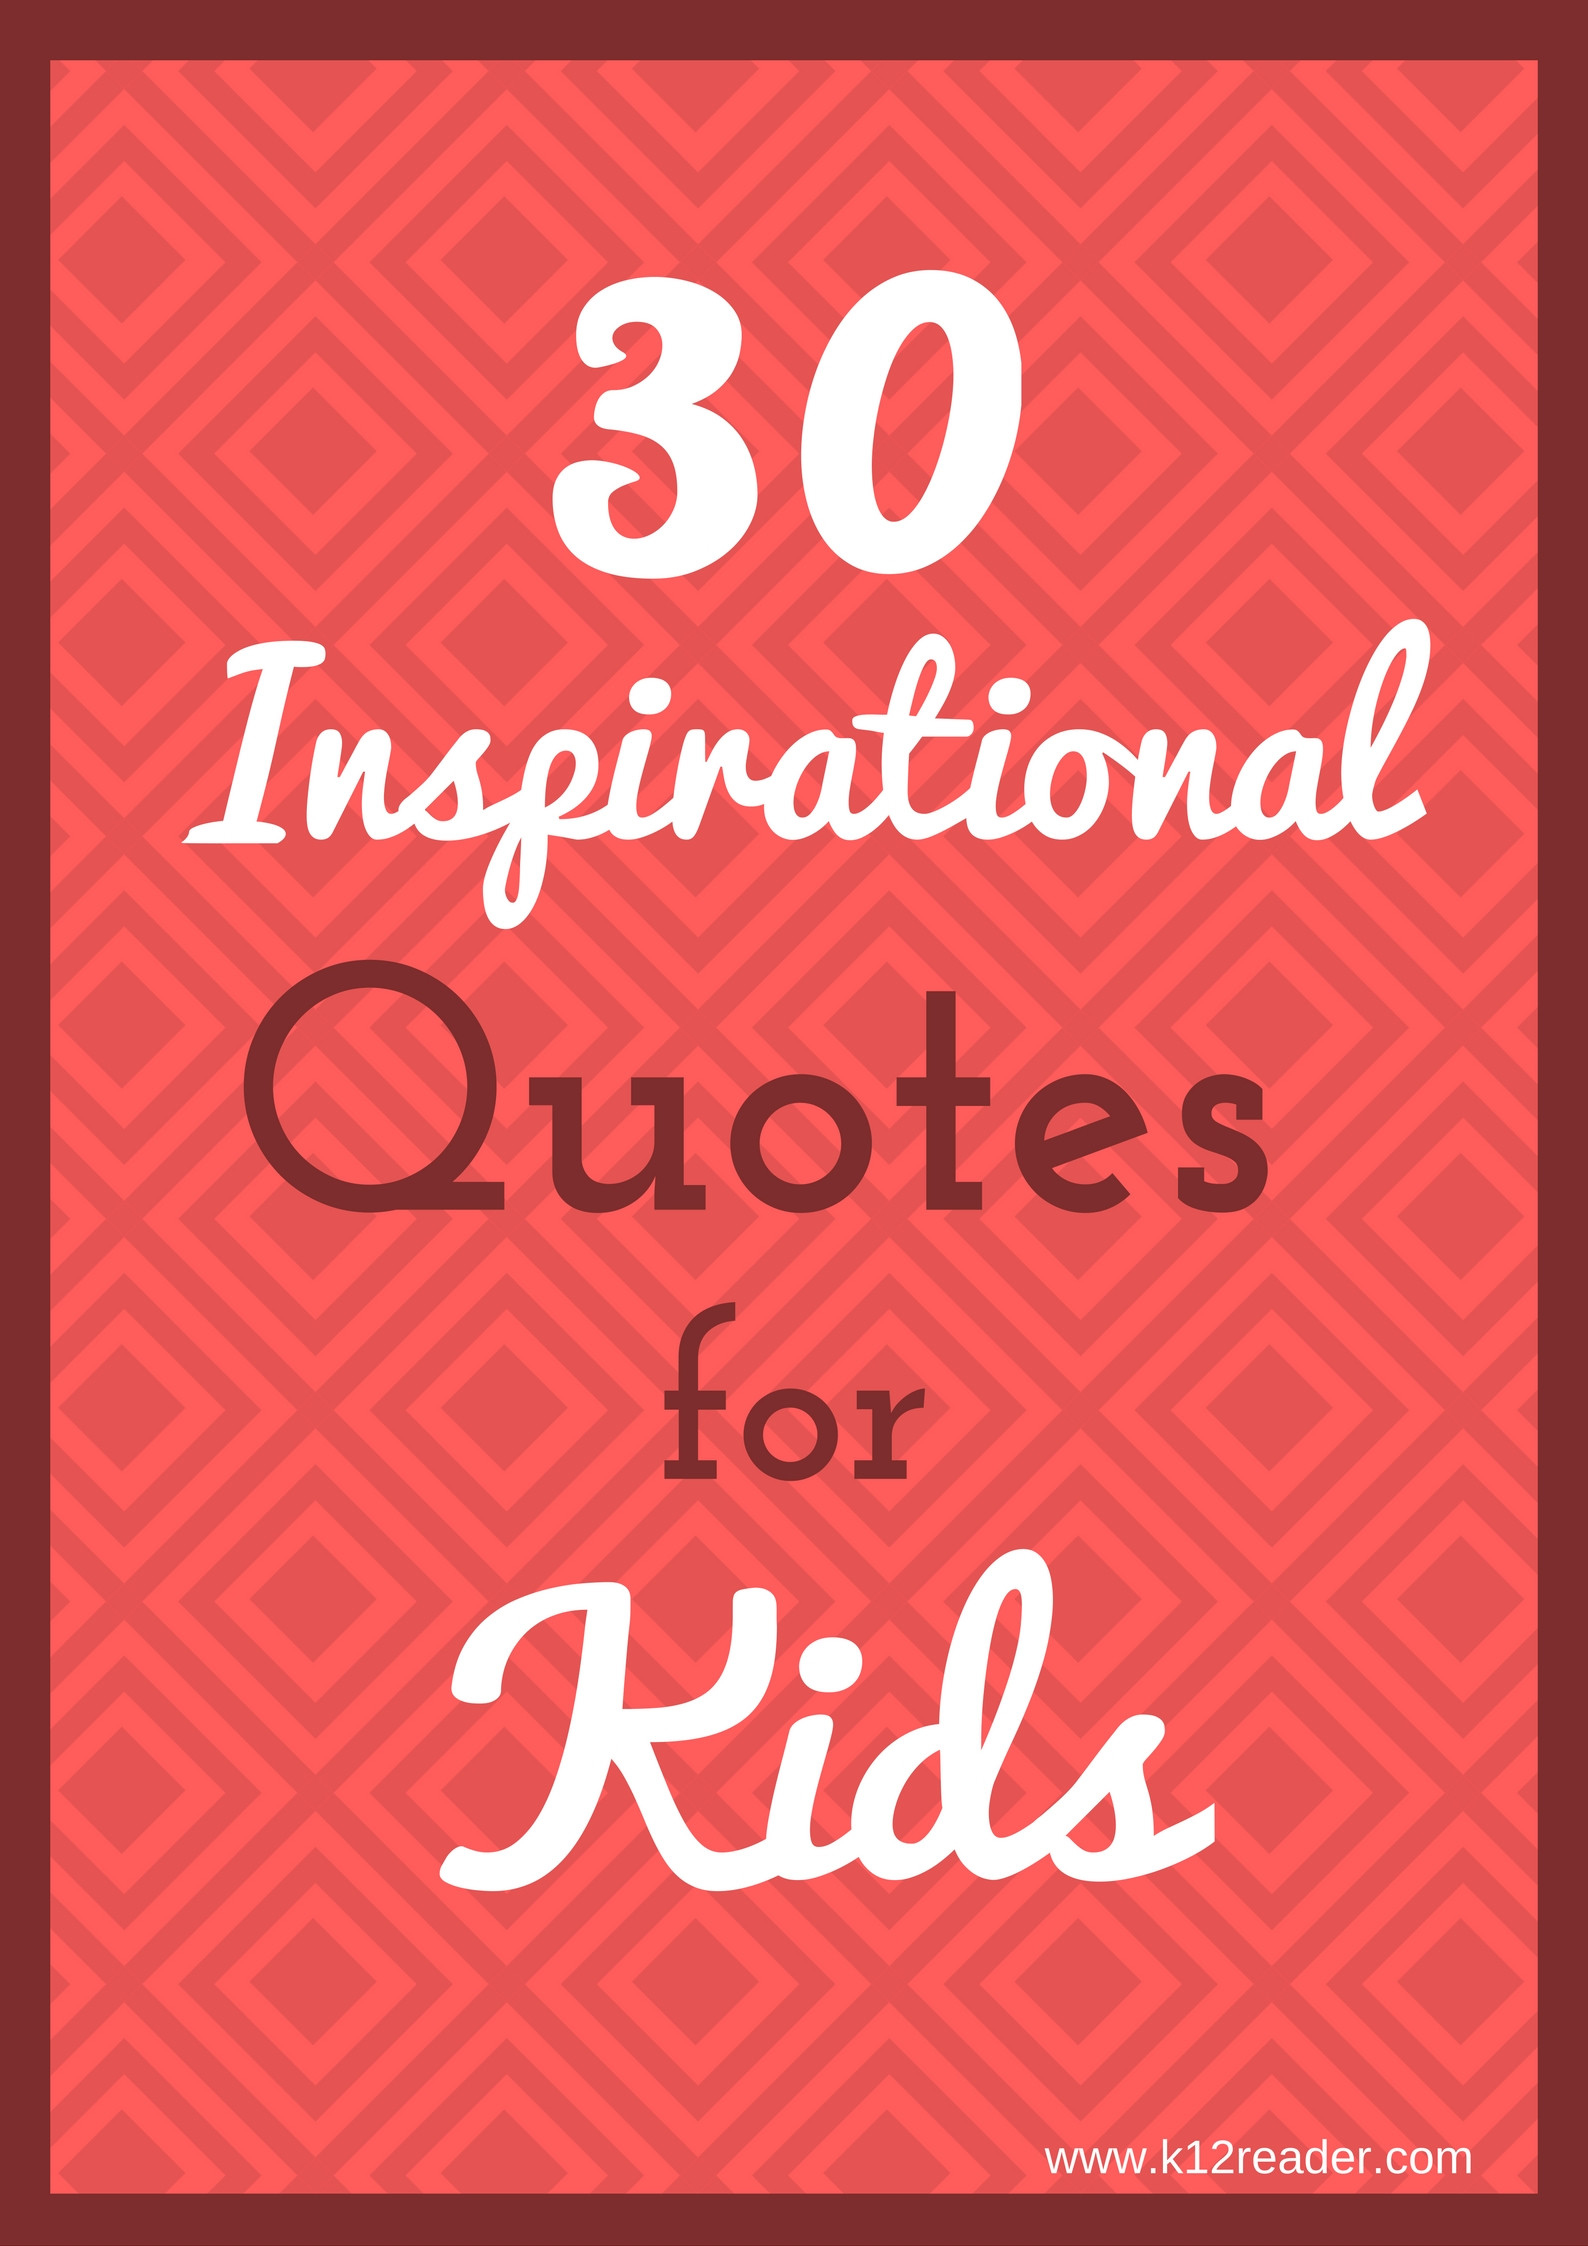 Inspiring Quotes For Kids
 30 Inspirational Quotes for Kids